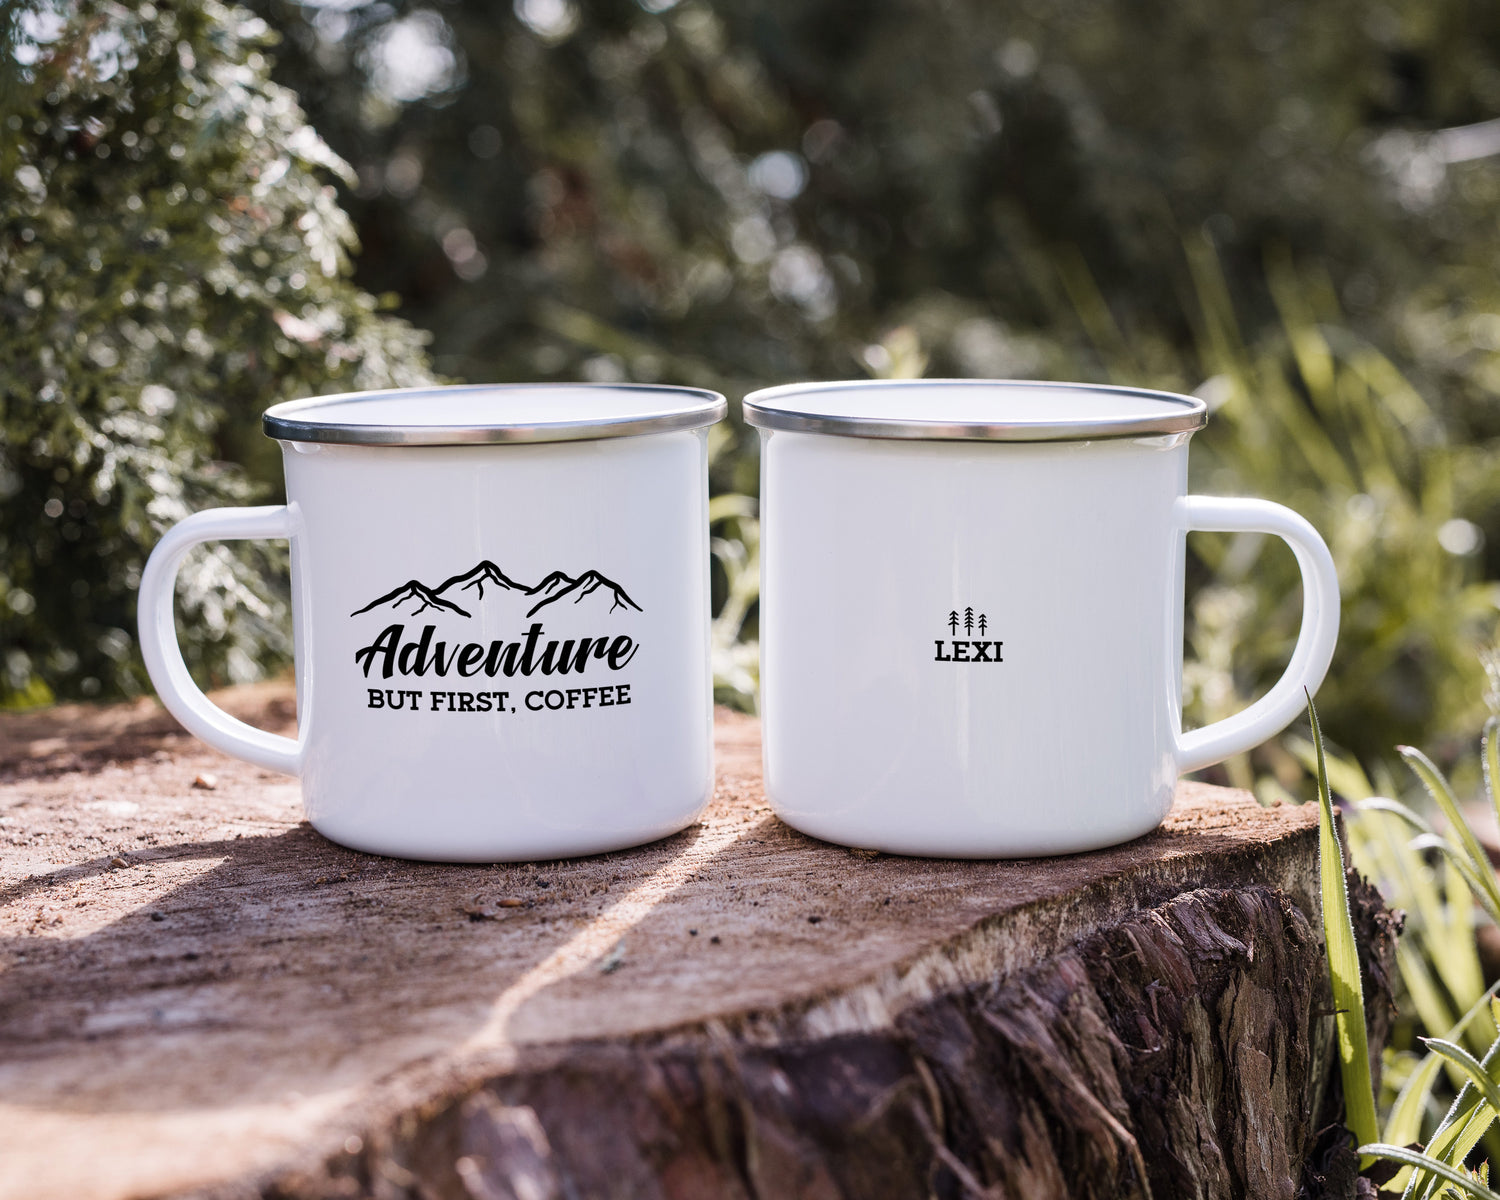 Camp Coffee Mug - At Any Time I May Snap — Bessie Young Photography